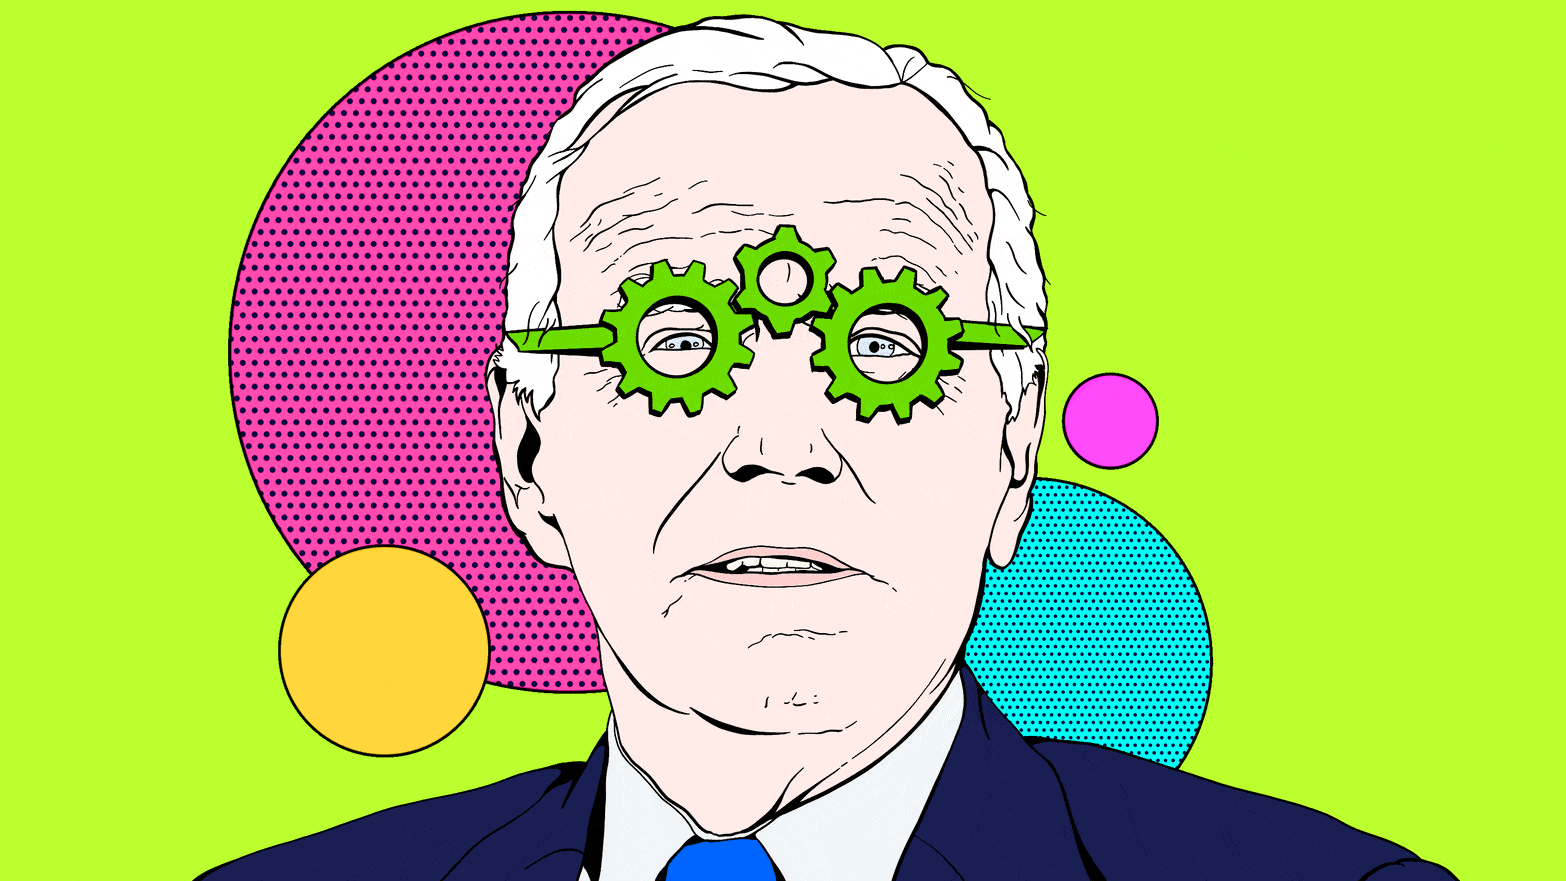 Illustrated gif of Joe Biden wearing glasses made out of spinning gears with dots behind him.